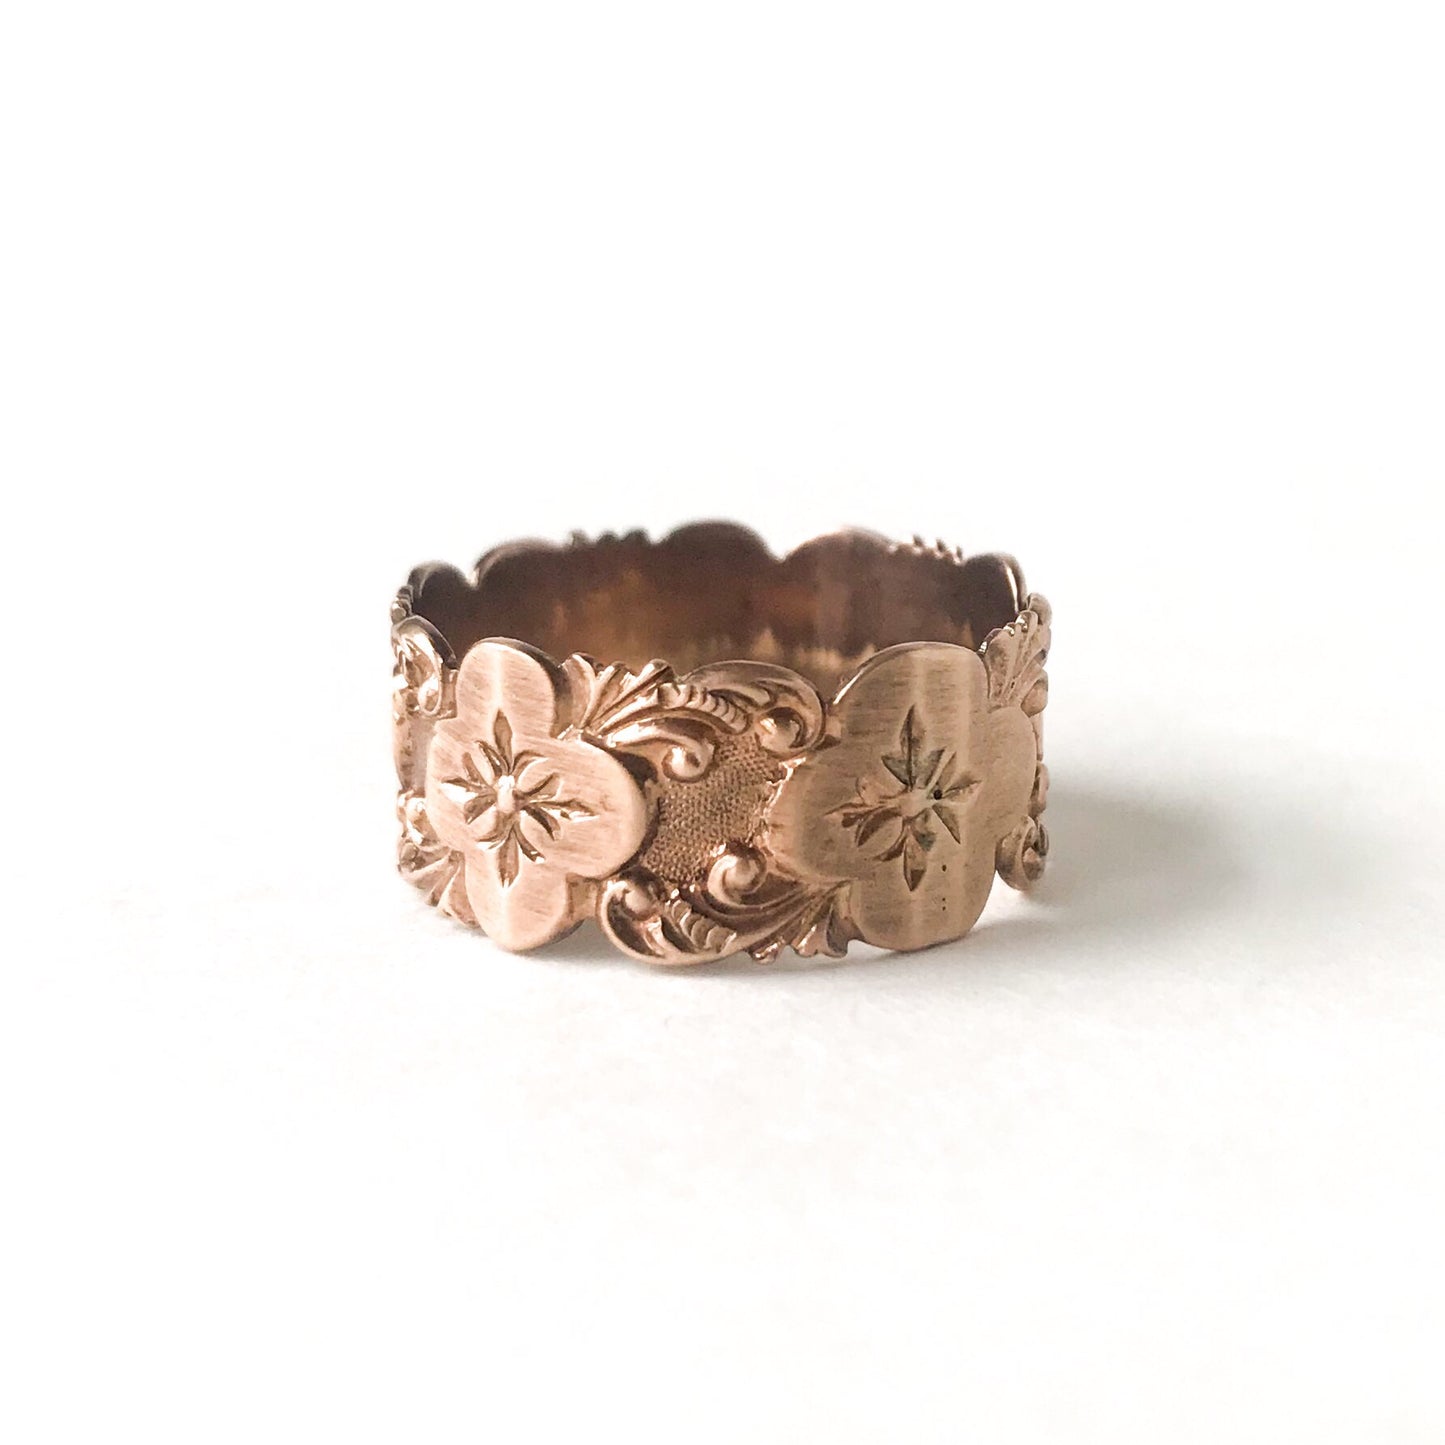 SOLD--Victorian 10mm Wide Patterned Band 14k c. 1880, size 10.5